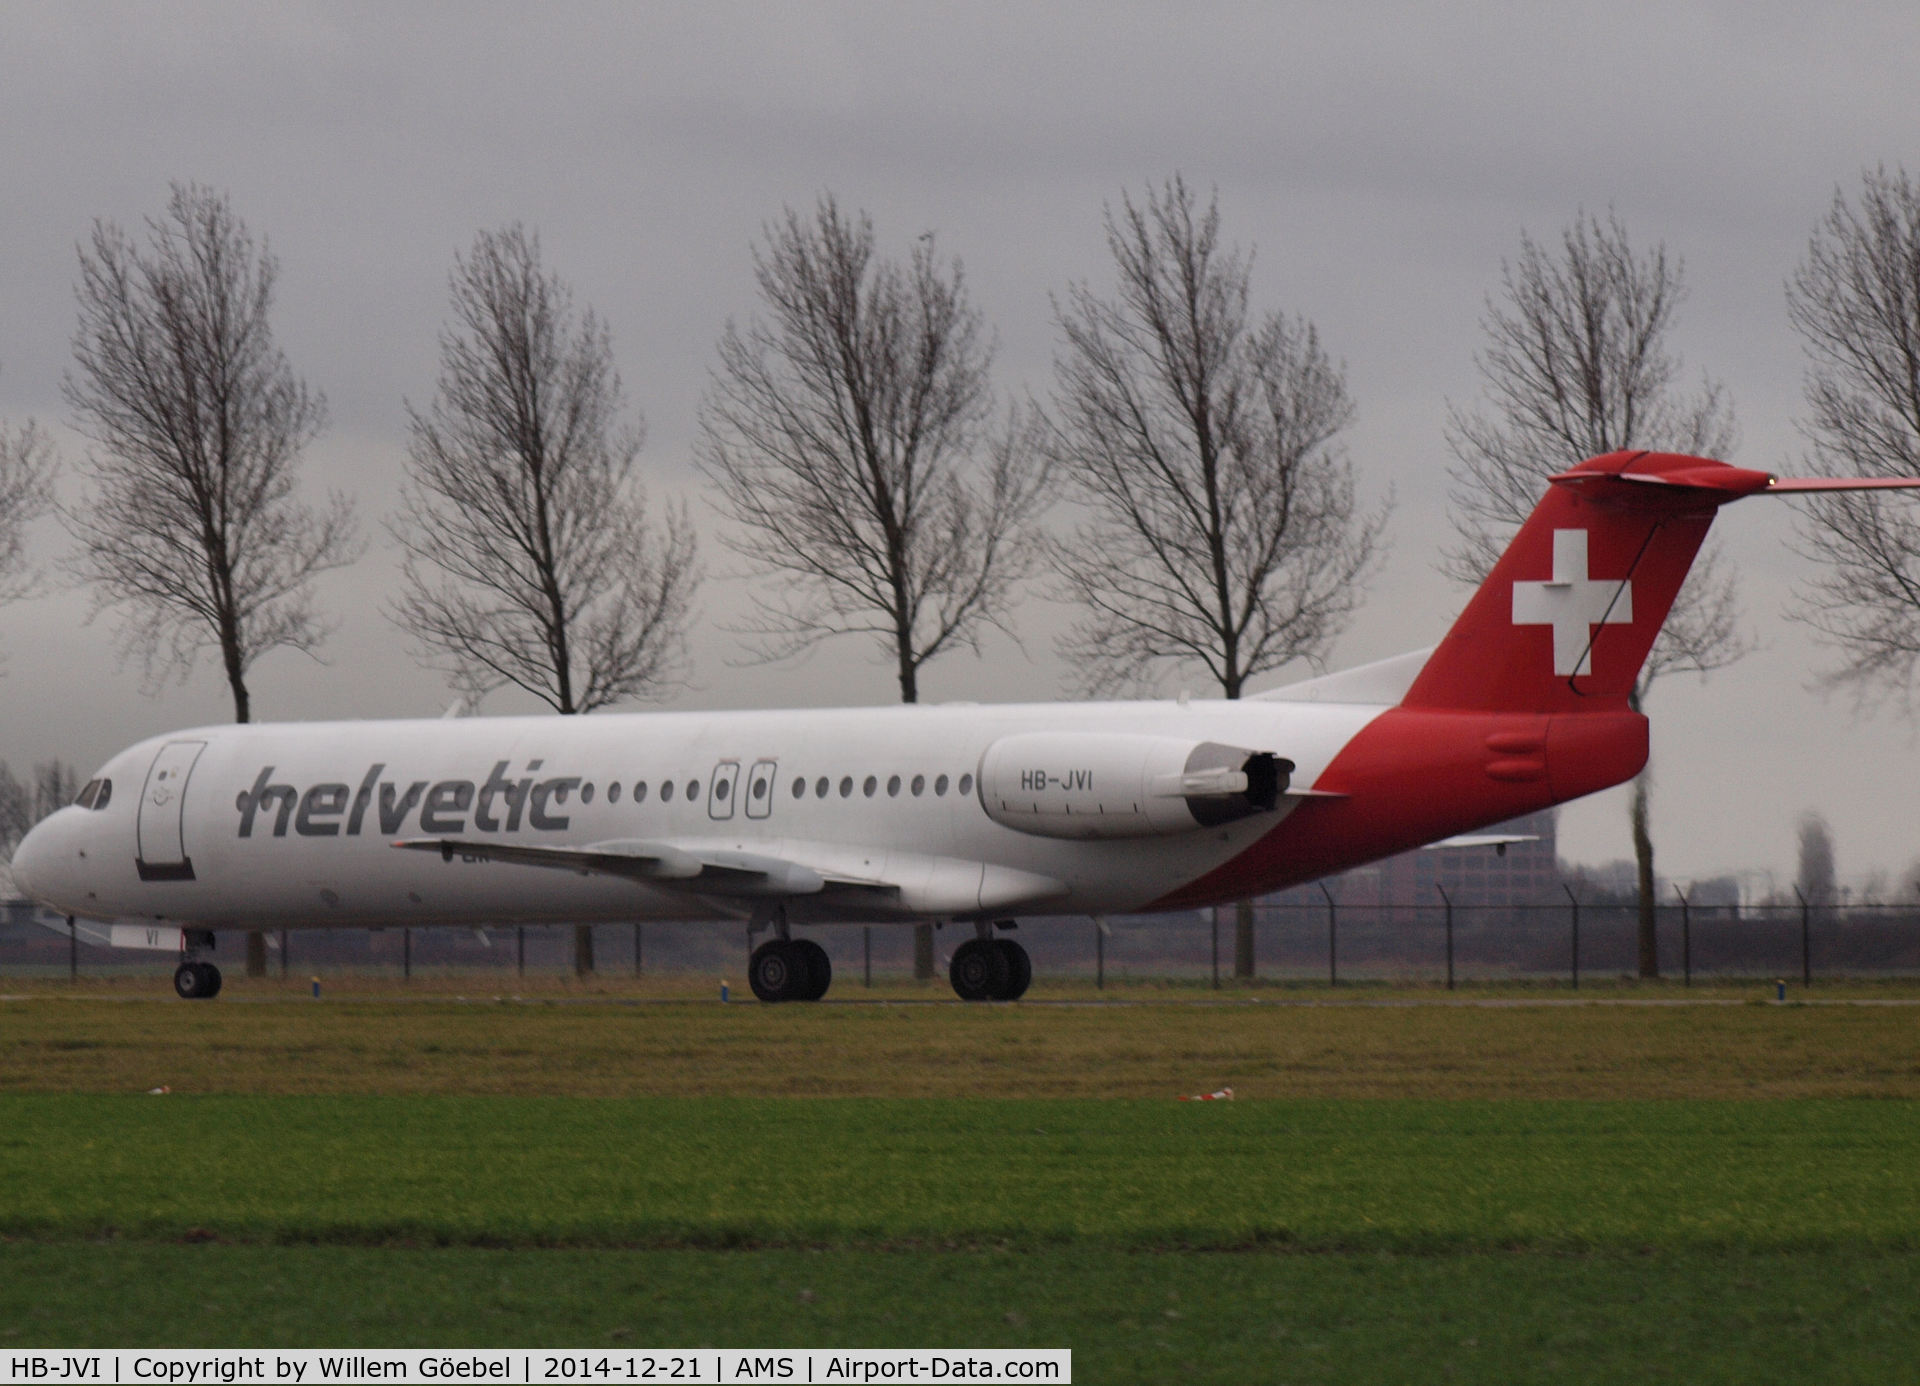 HB-JVI, 1990 Fokker 100 (F-28-0100) C/N 11325, Taxi from runway 18R to the gate of Schiphol Airport